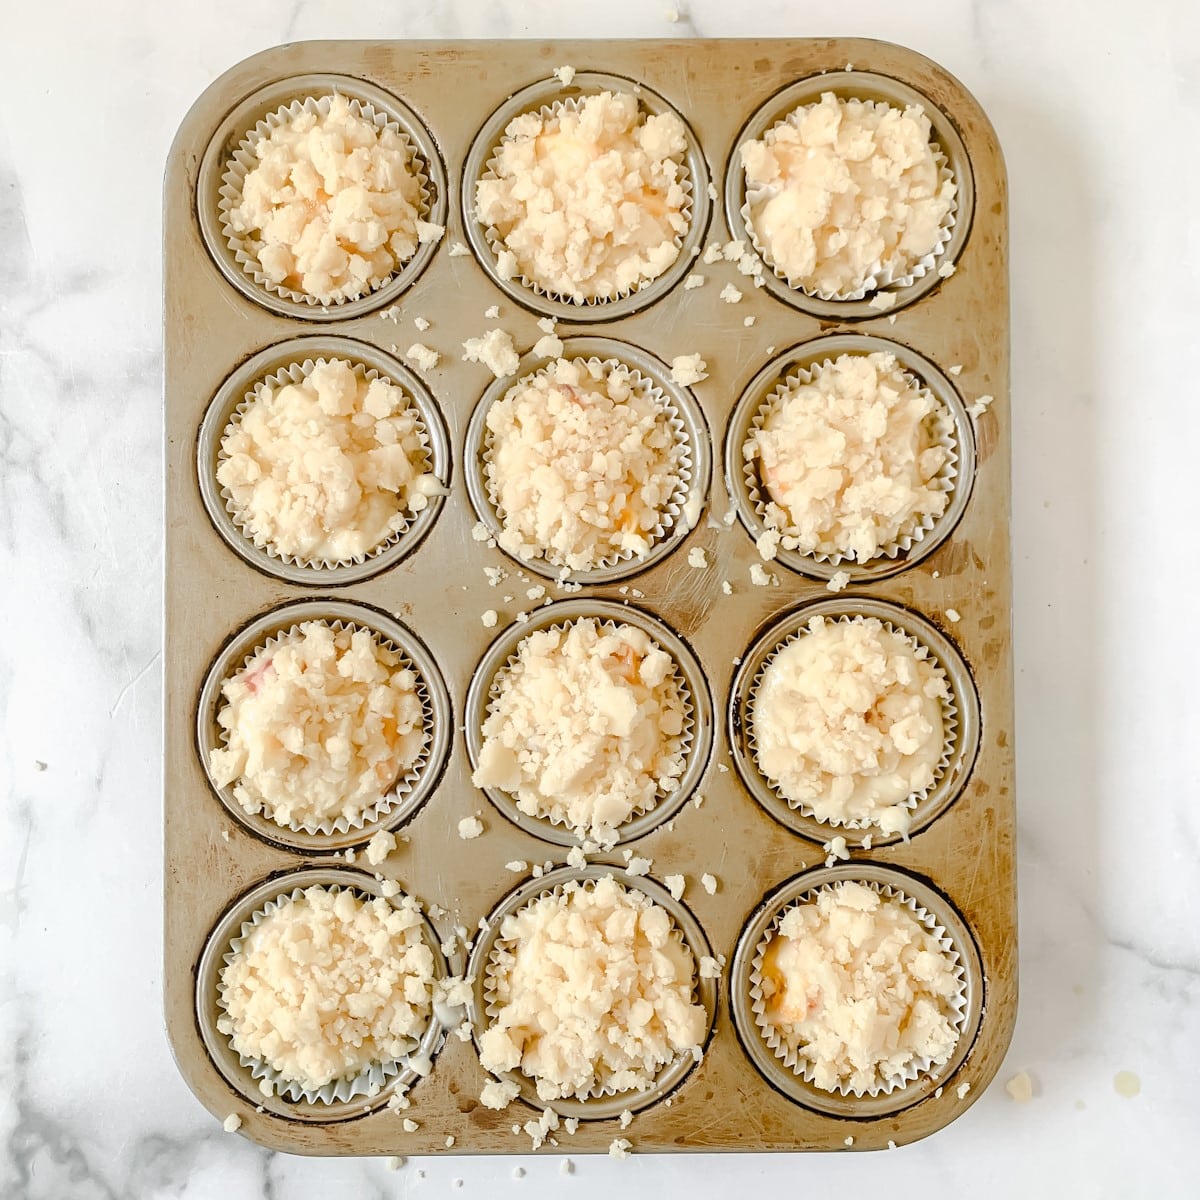 Unbaked muffins with streusel in muffin pan